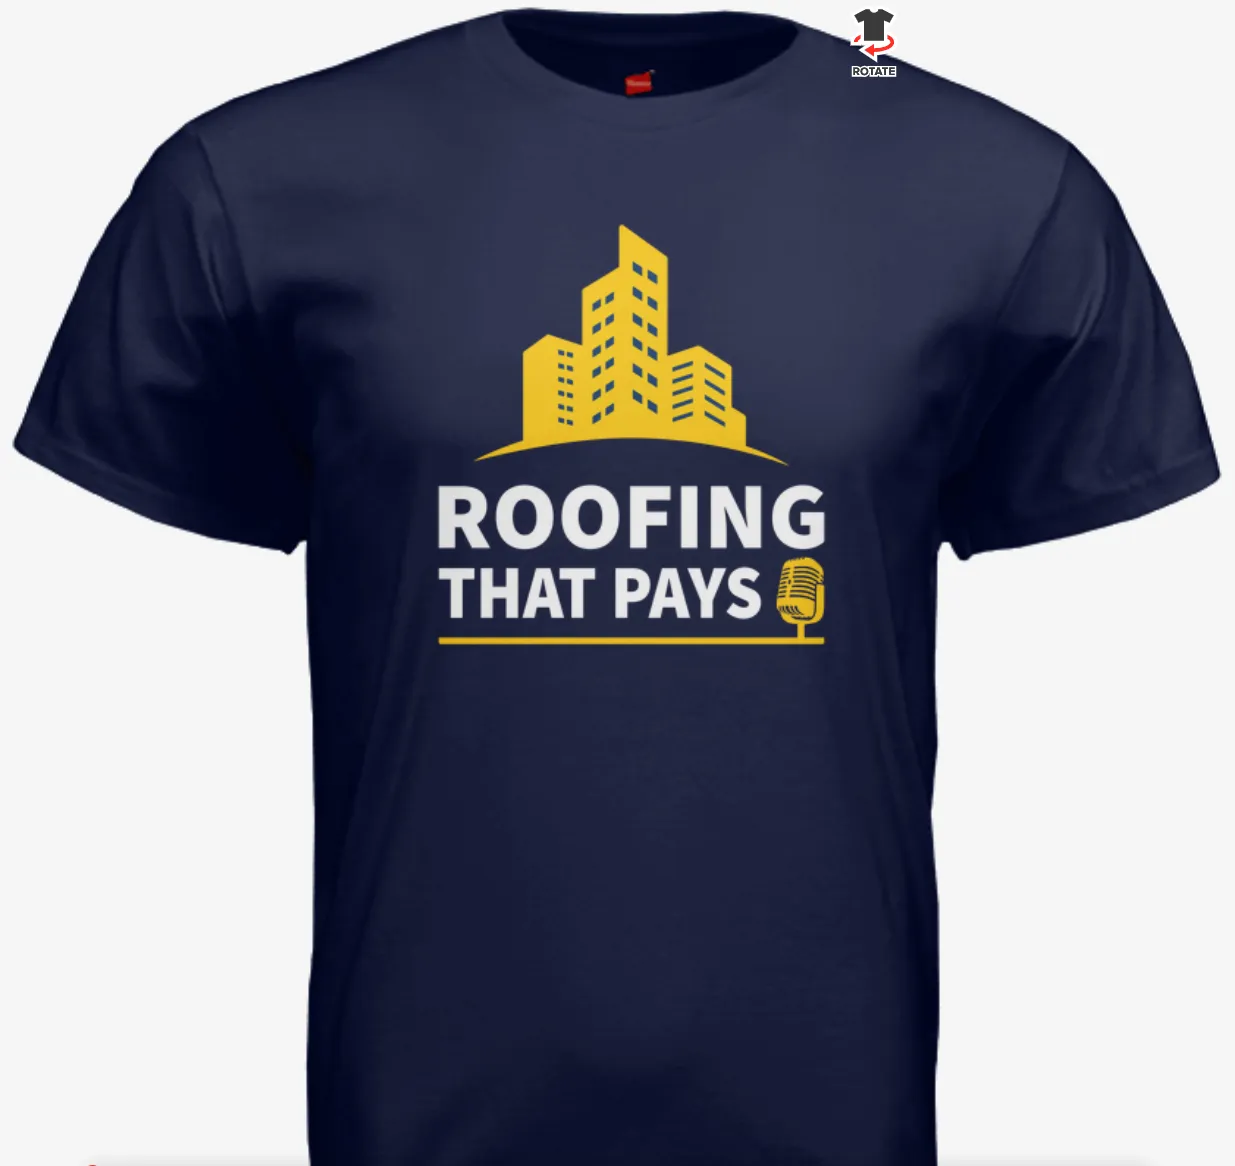 Roofing That Pays tee shirt